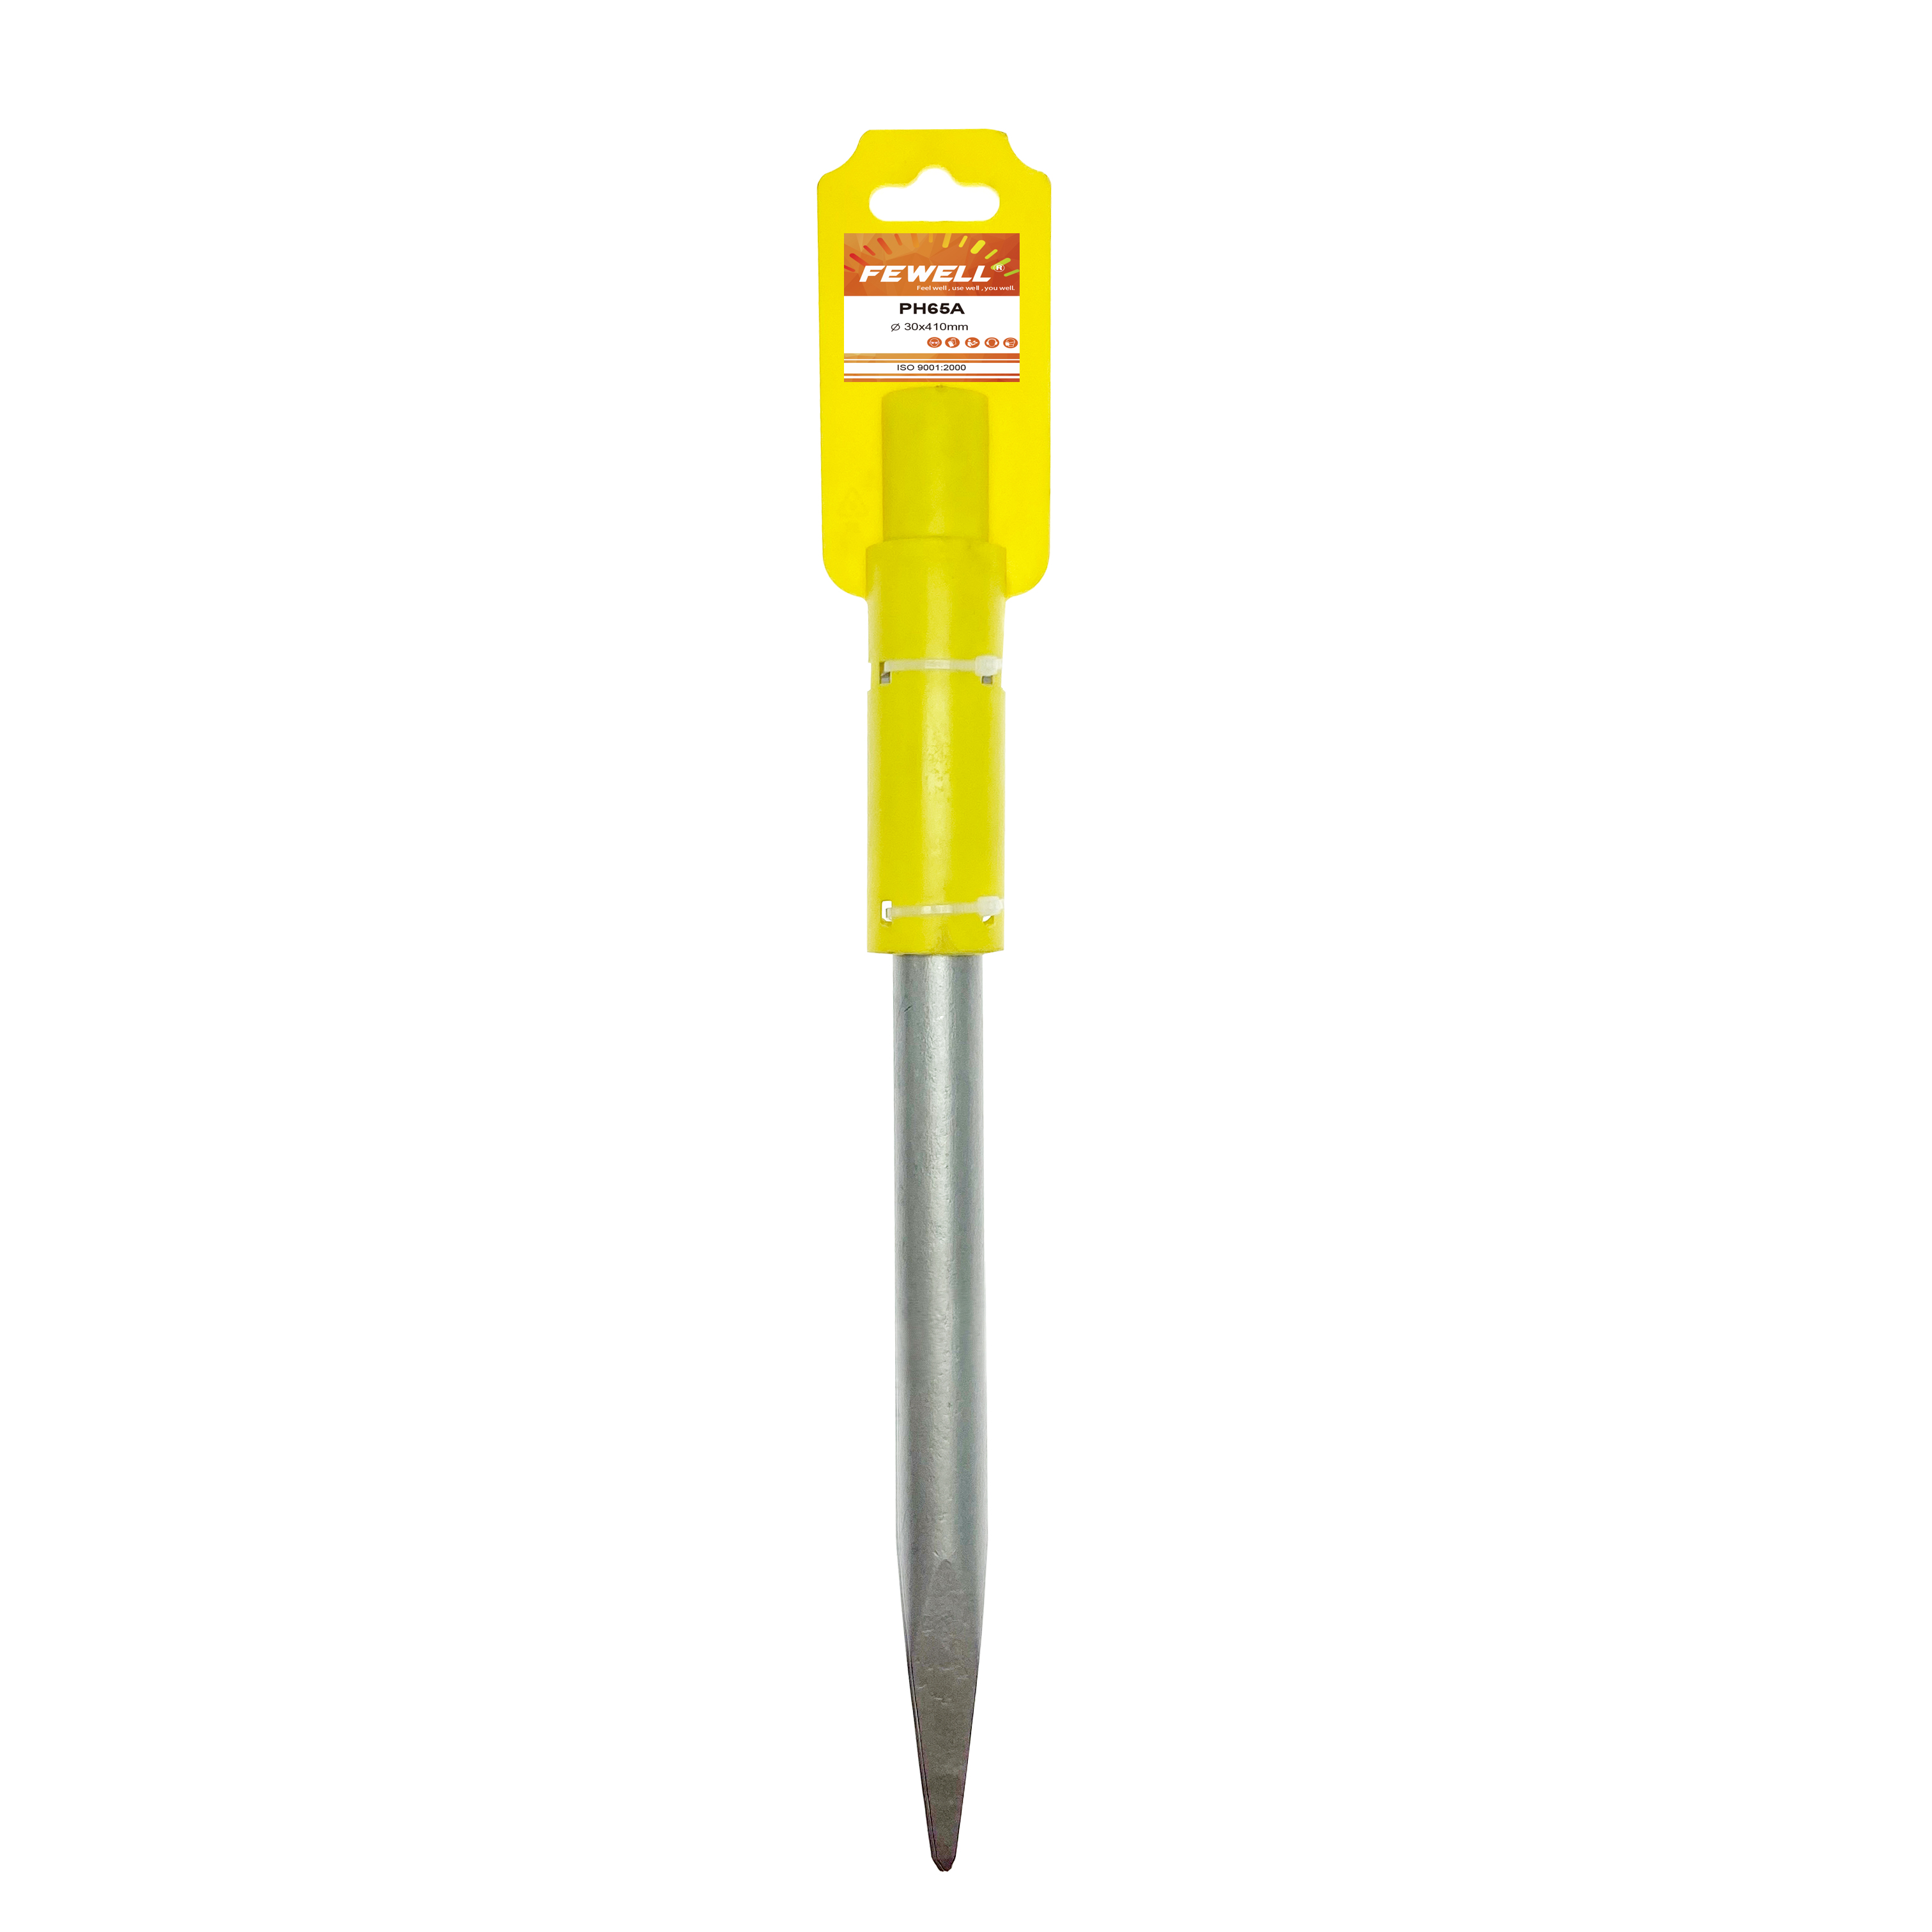 High quality 30 PH65A Electric hammer drill point chisel for Tile Masonry Concrete Brick stone